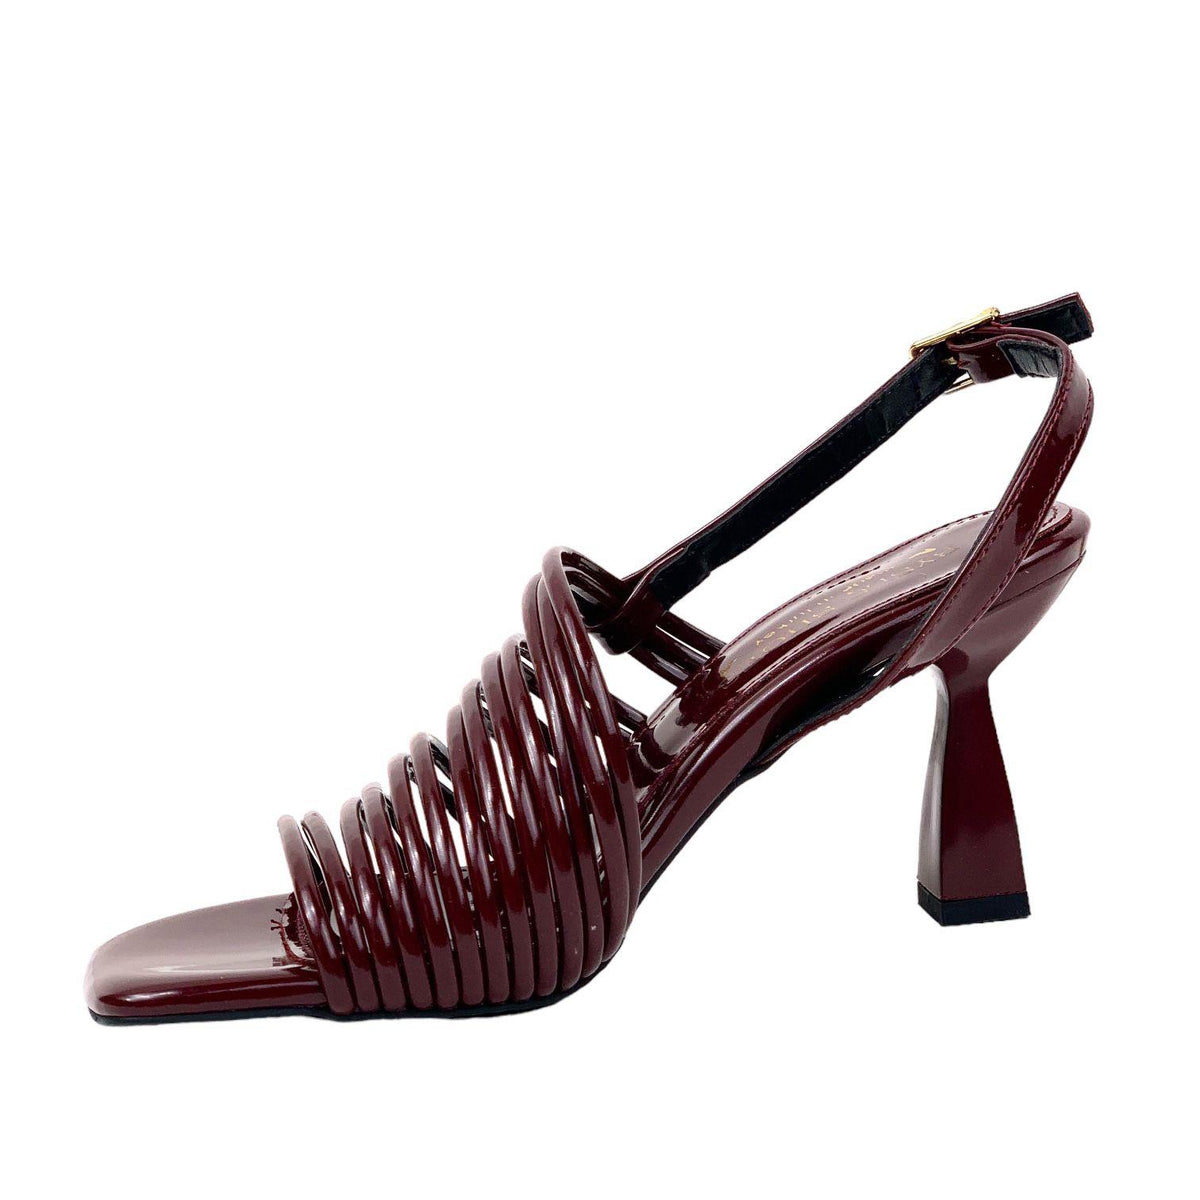 Women's Calç Claret Red Patent Leather Heeled Ankle Strap Sandals - STREETMODE ™